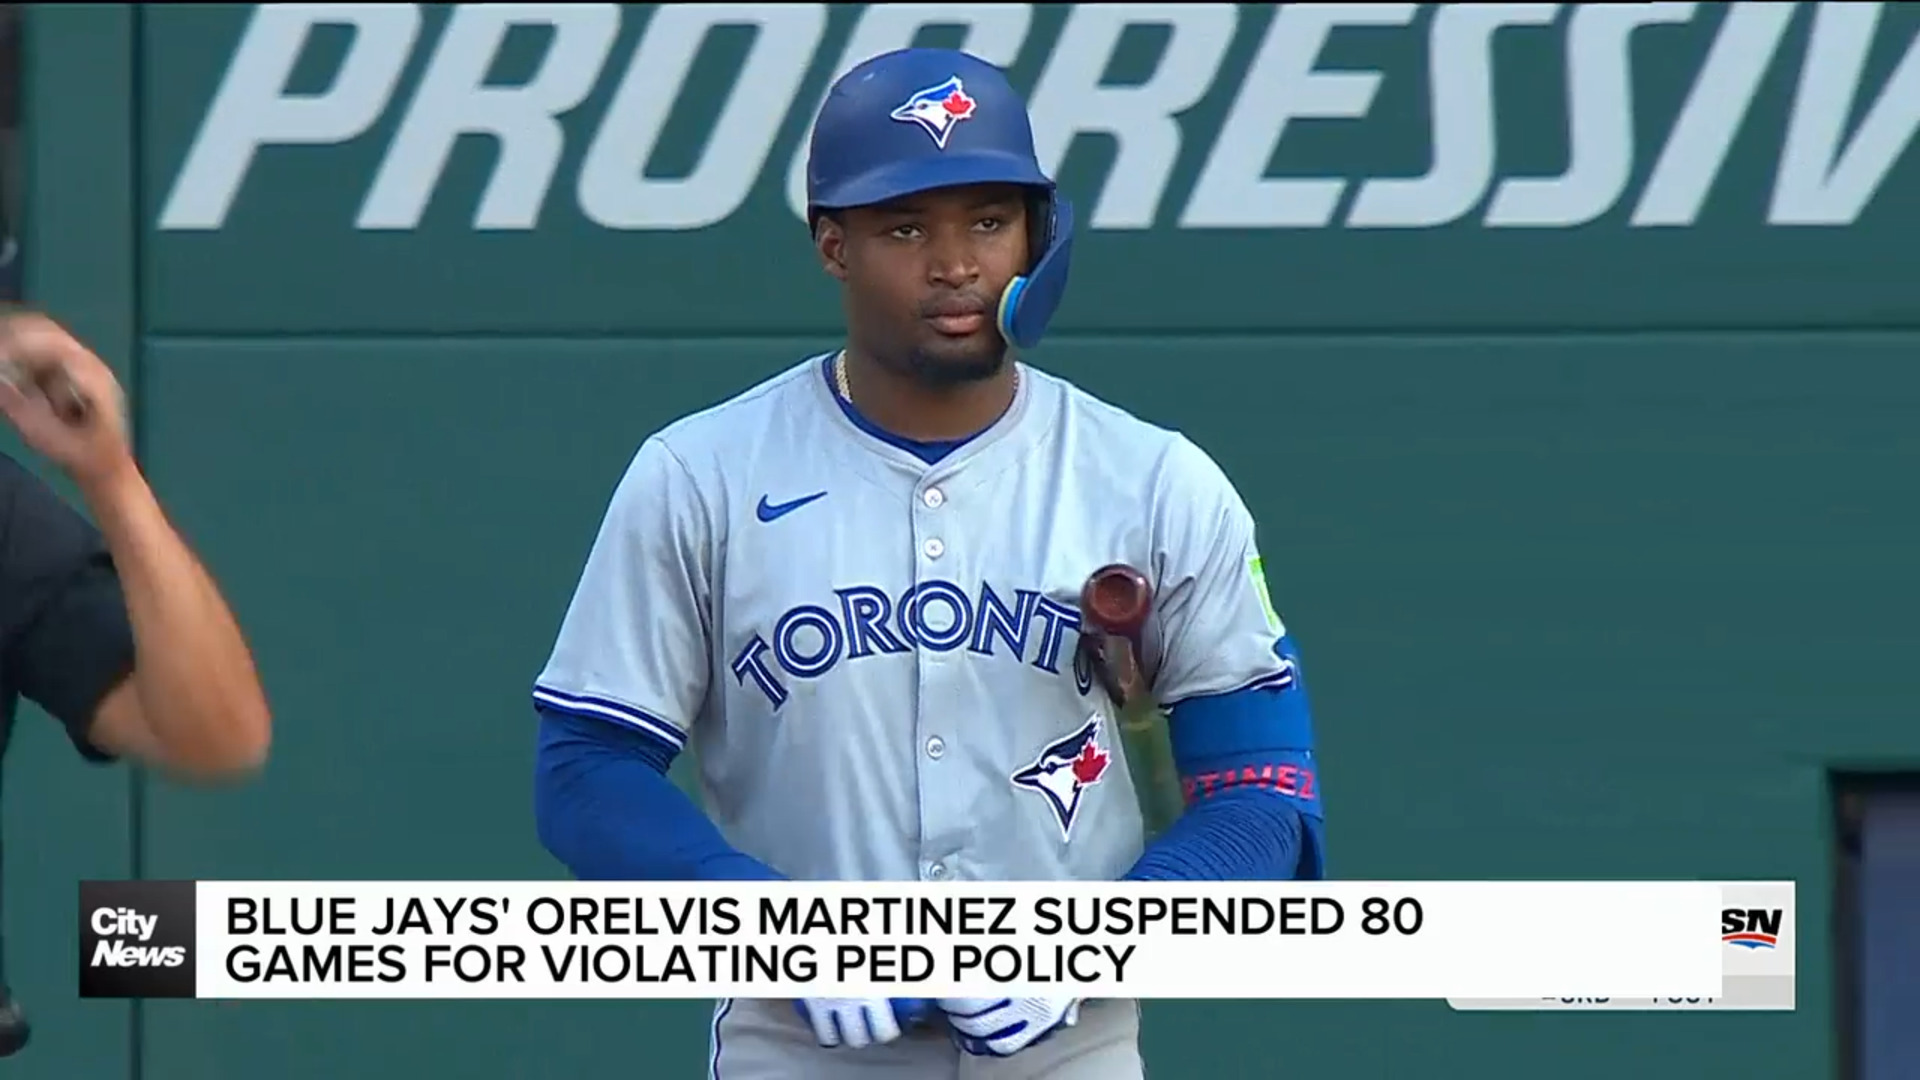 Toronto Blue Jays' Orelvis Martinez suspended 80 games for violating PED policy